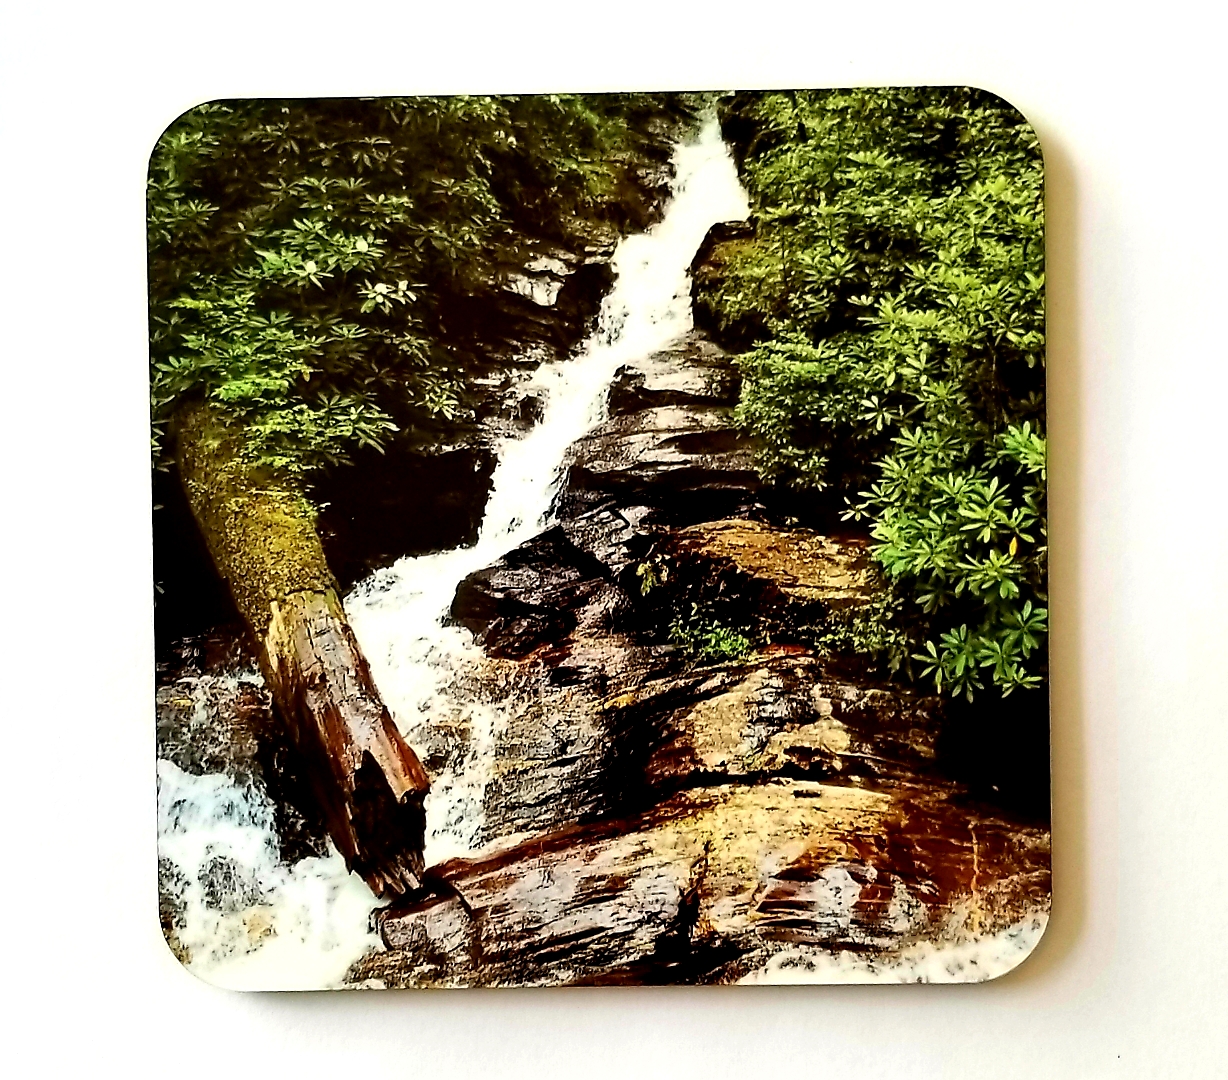 Waterfall Coaster made with sublimation printing